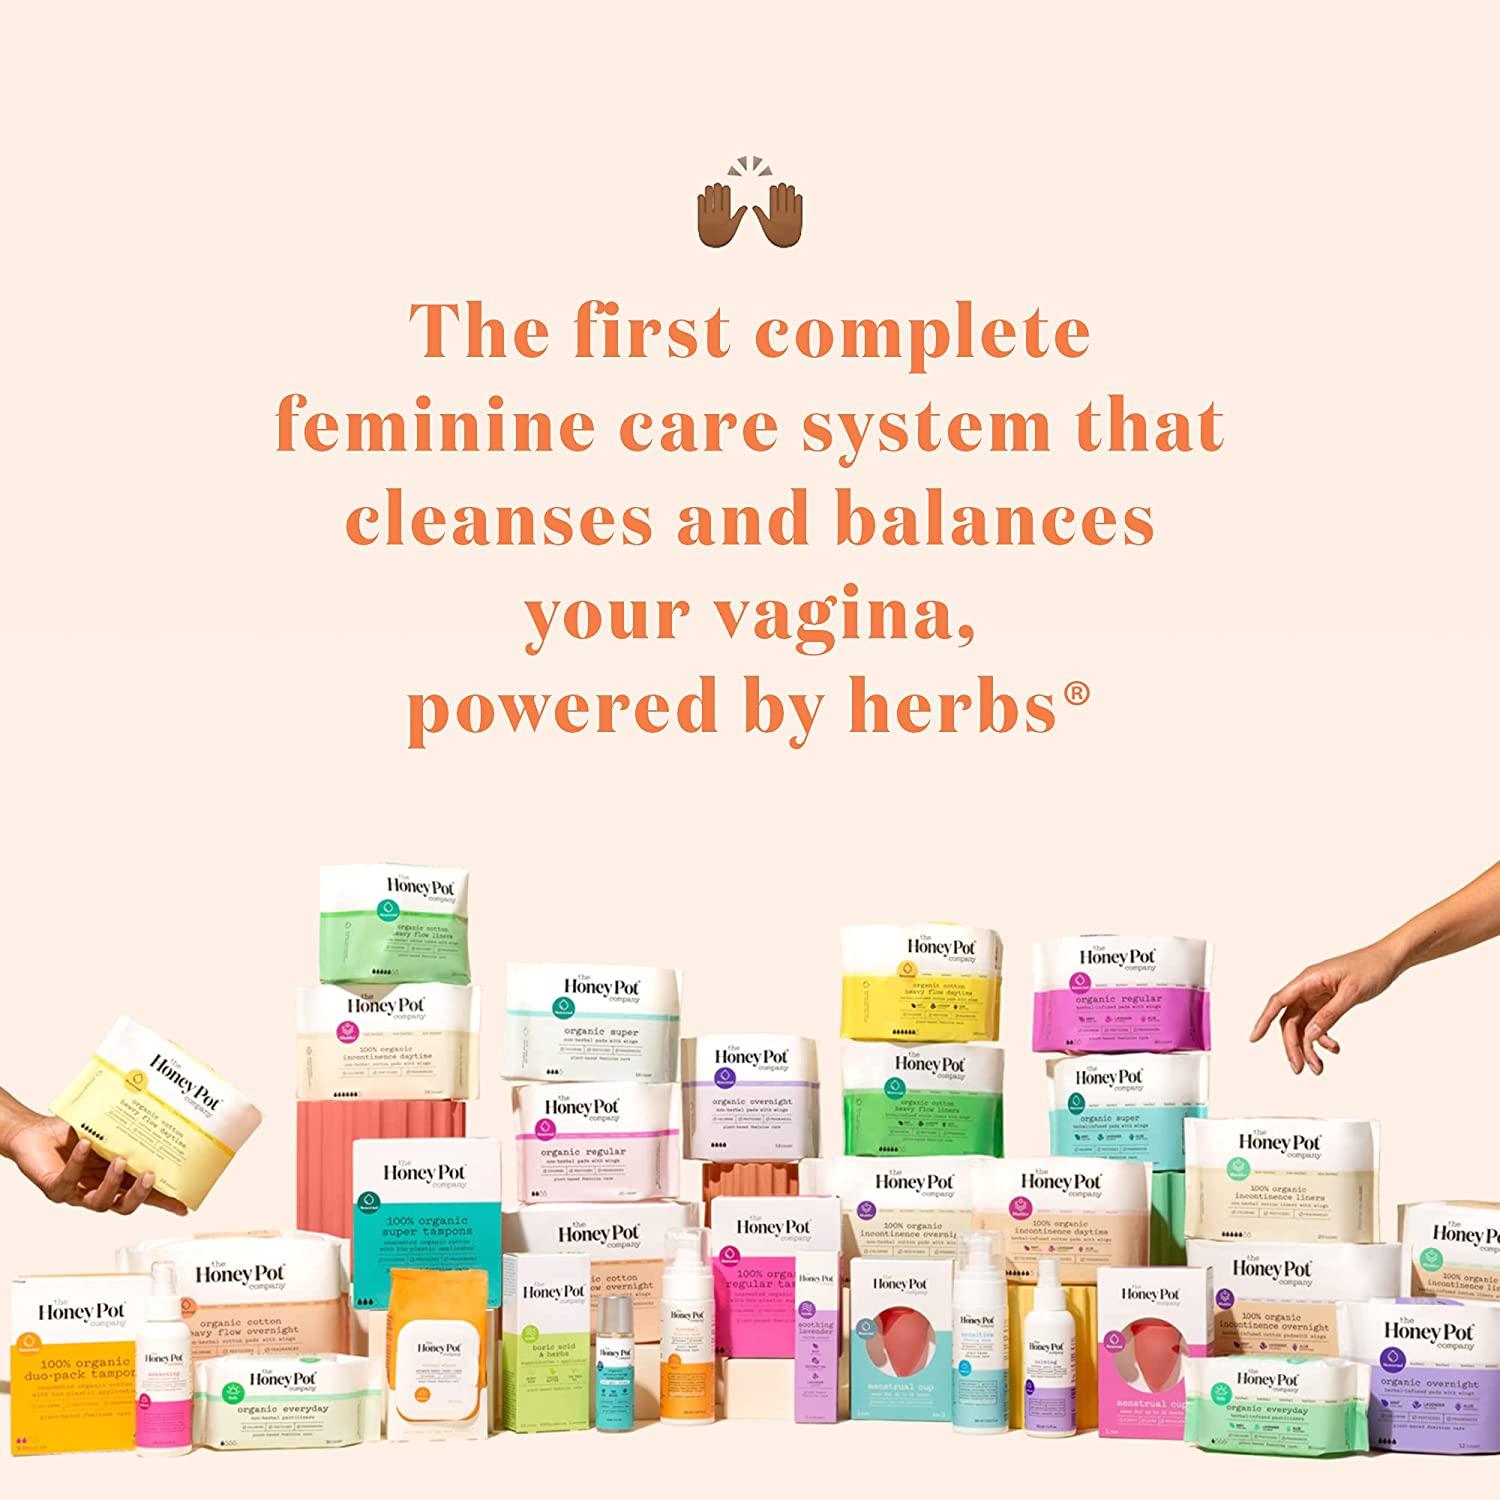  The Honey Pot Company - Herbal Postpartum Pads with Wings -  Full Coverage - Herbal Infused w/Essential Oils for Cooling Effect, Organic  Cotton Cover, & Ultra-Absorbent - Postpartum Essentials - 12ct 